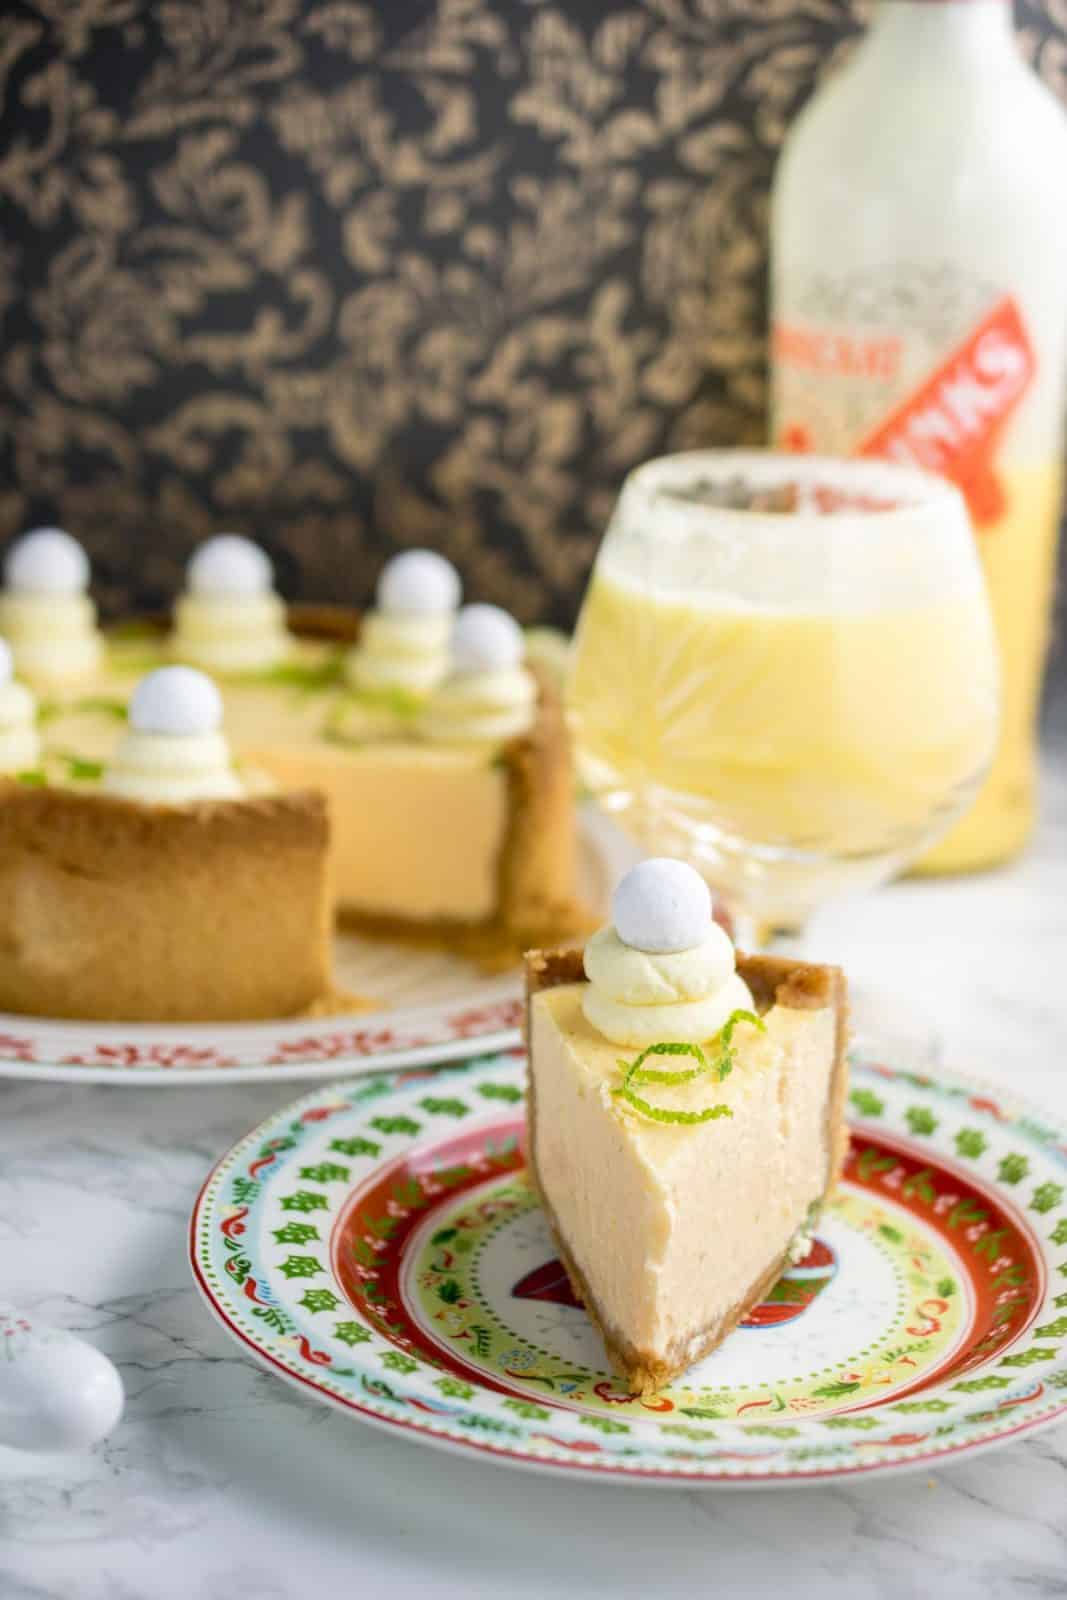 Instant Pot Snowball Cheesecake